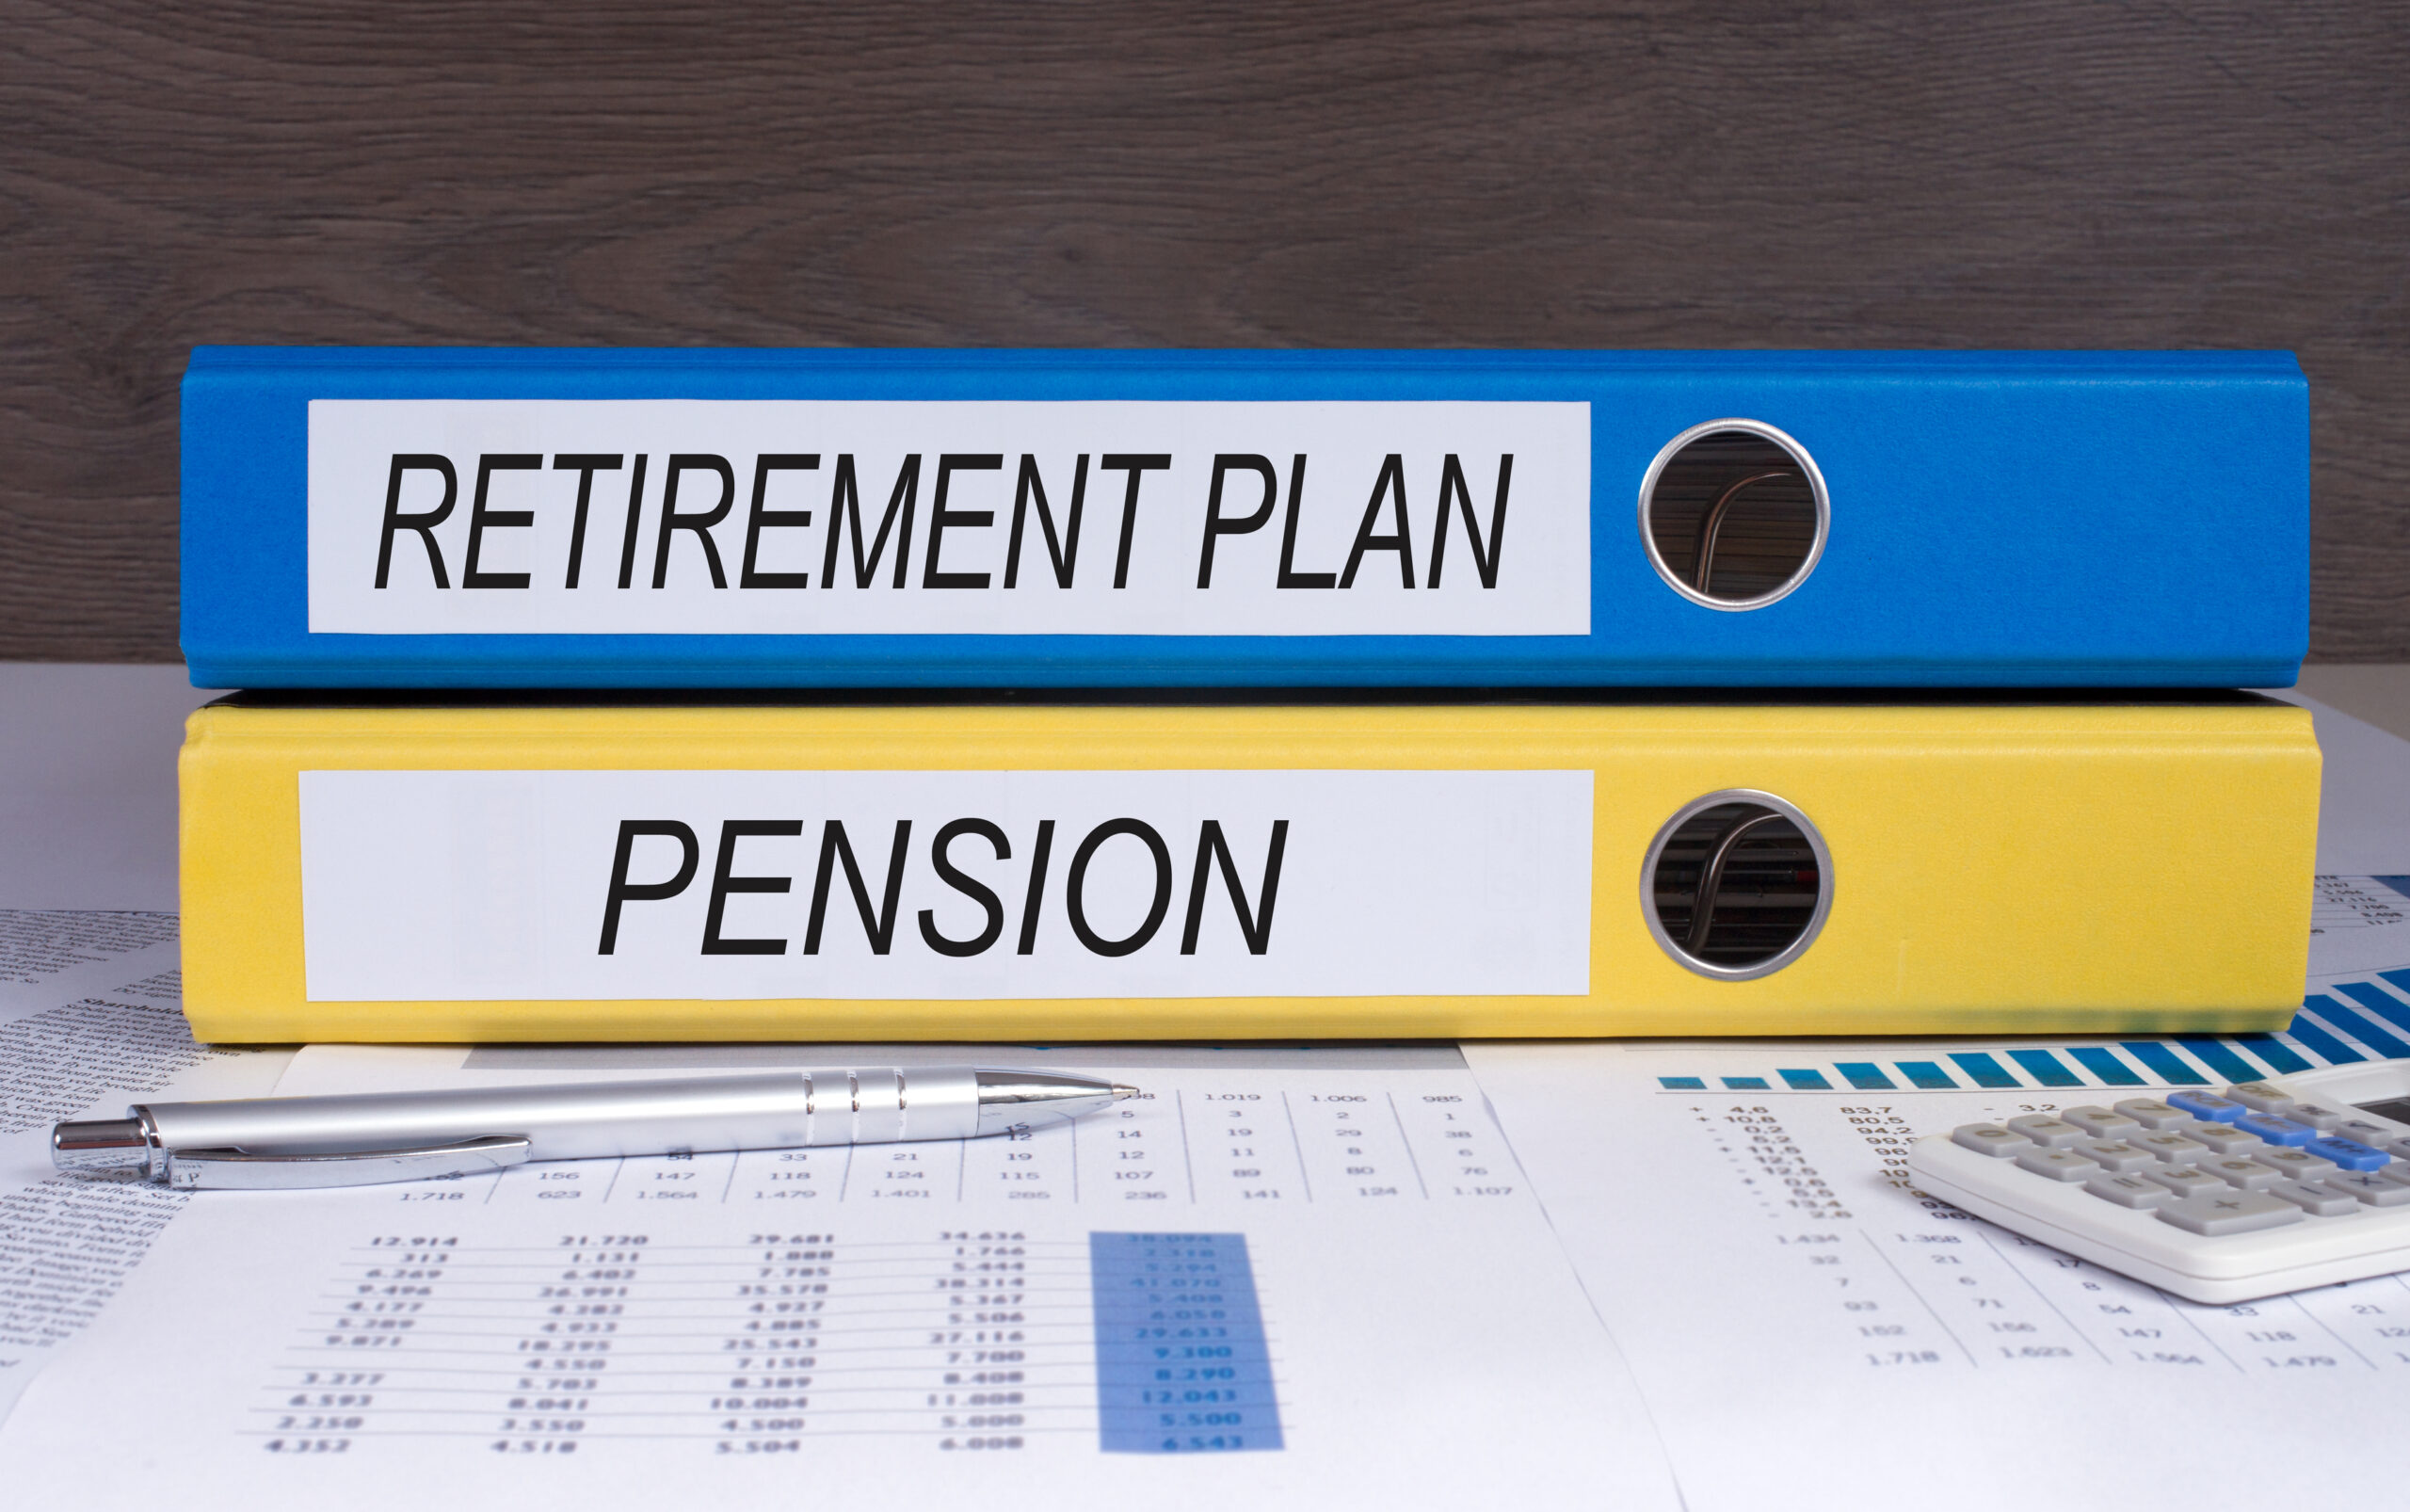 Pension Reform Newsletter: Pension Plans Should Avoid Social Investing Strategies, Analysis of Louisiana’s Pension Systems, and More